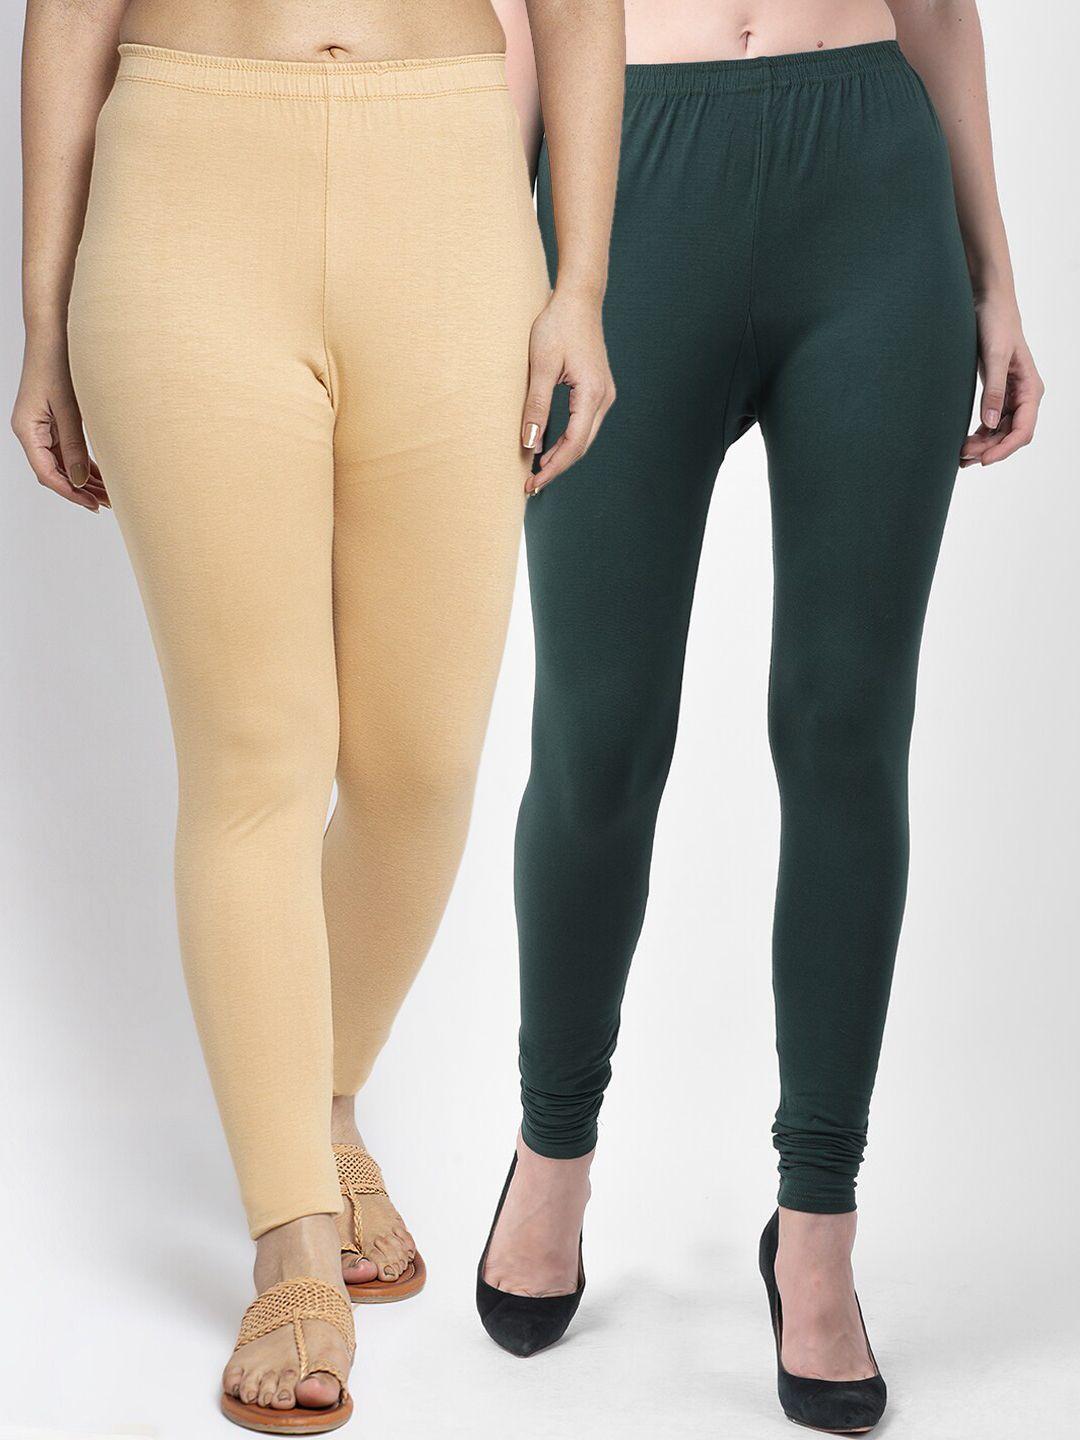 jinfo pack of 2 green & beige solid ankle length leggings